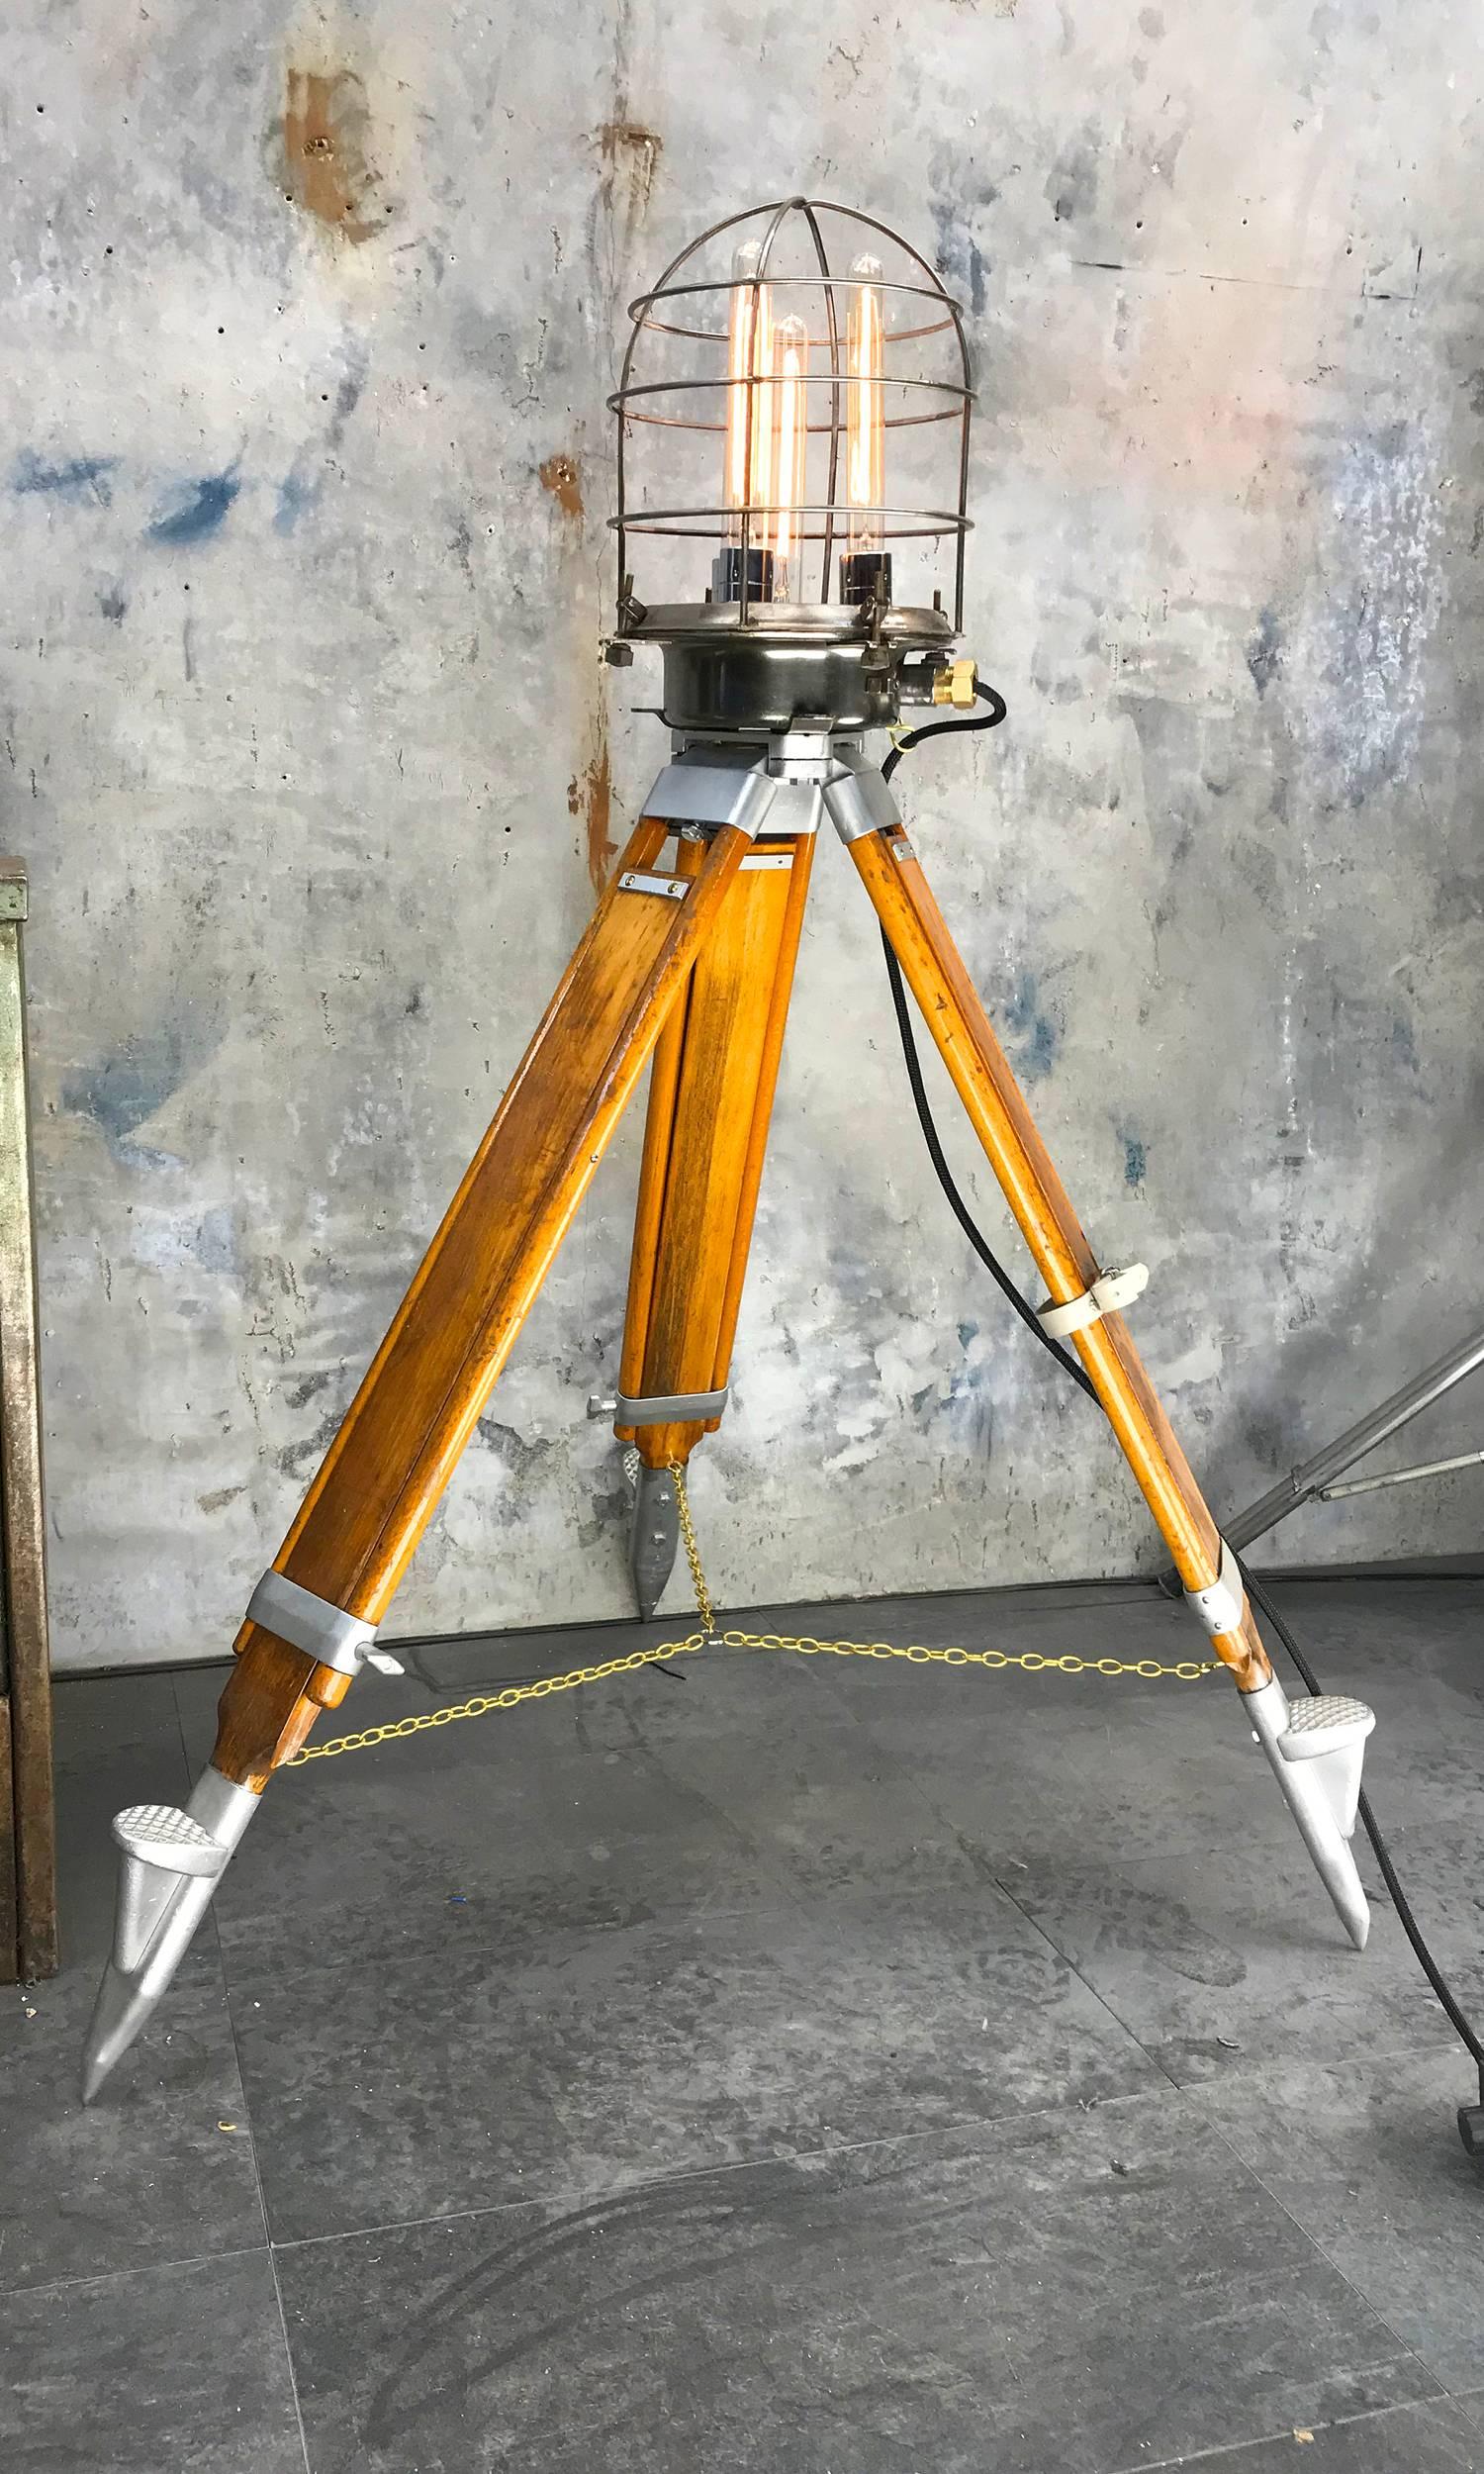 Unique Steampunk style tripod lamp with four Edison filament bulbs.

The head is a mild steel lamp casing reclaimed from a Russian cargo ship.

Here at loomlight we have removed all the original electrics and four chromed E27 lamp holders with